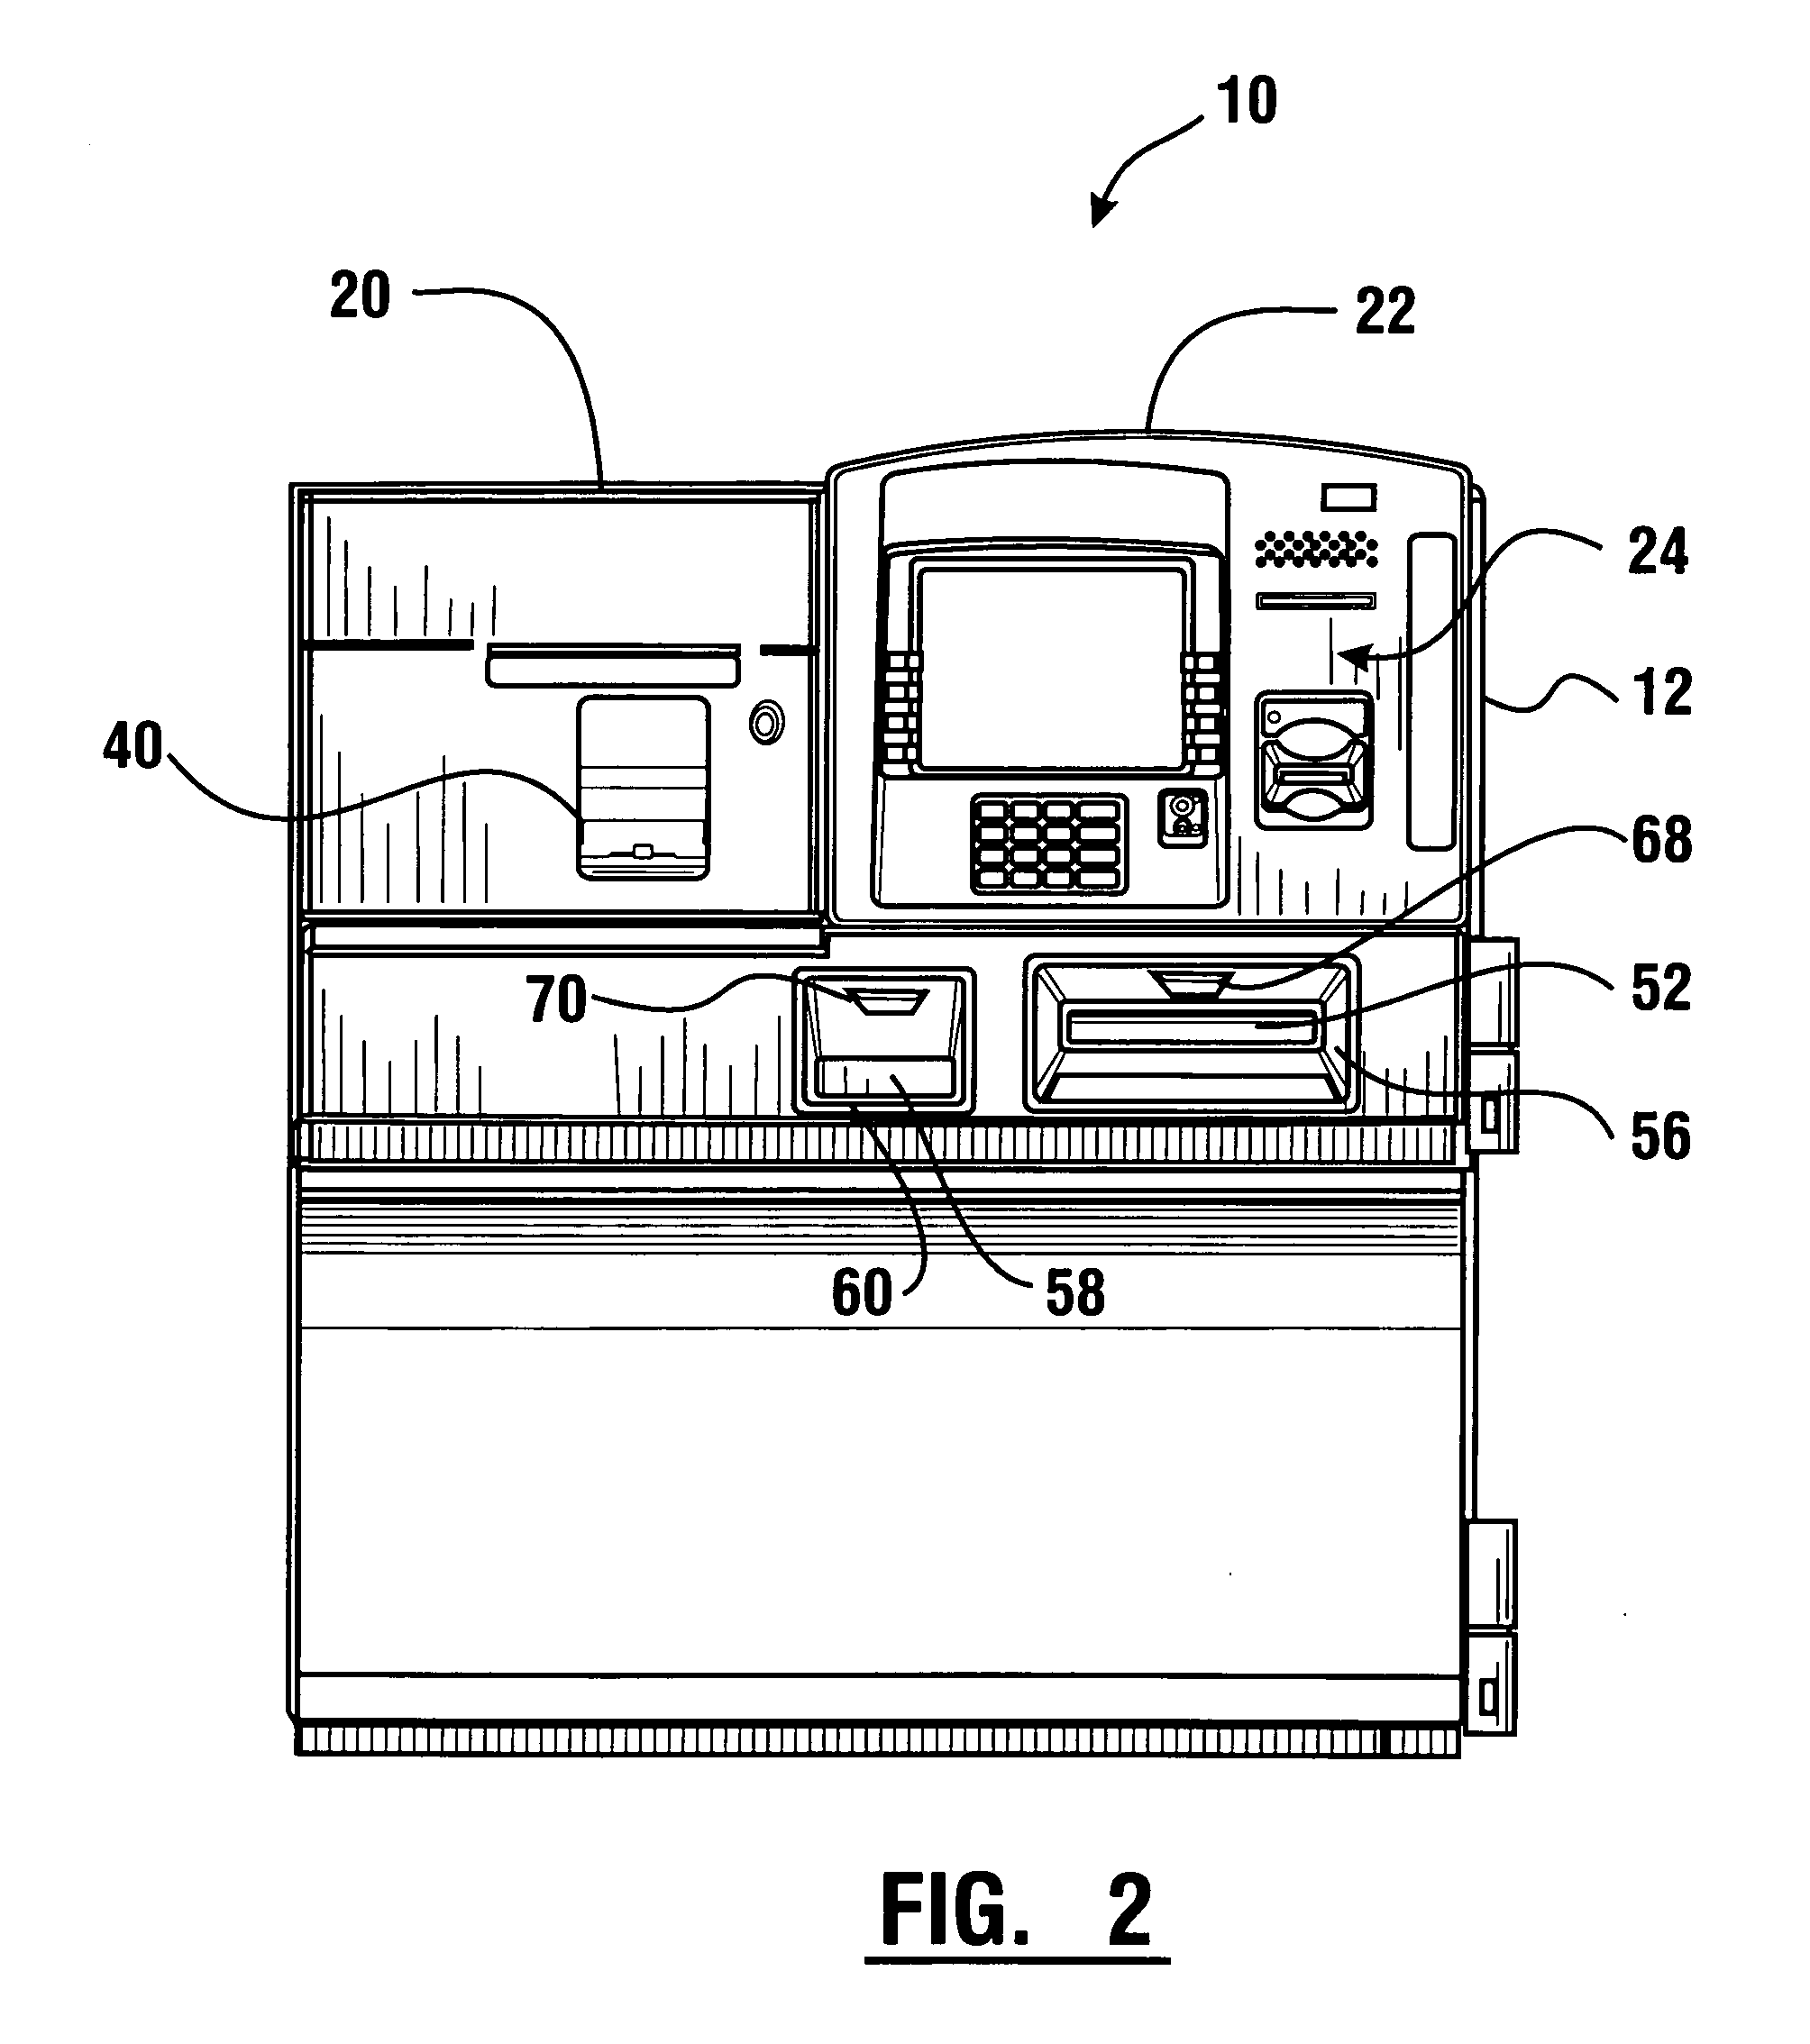 Automated banking machine that operates responsive to data read from data bearing records